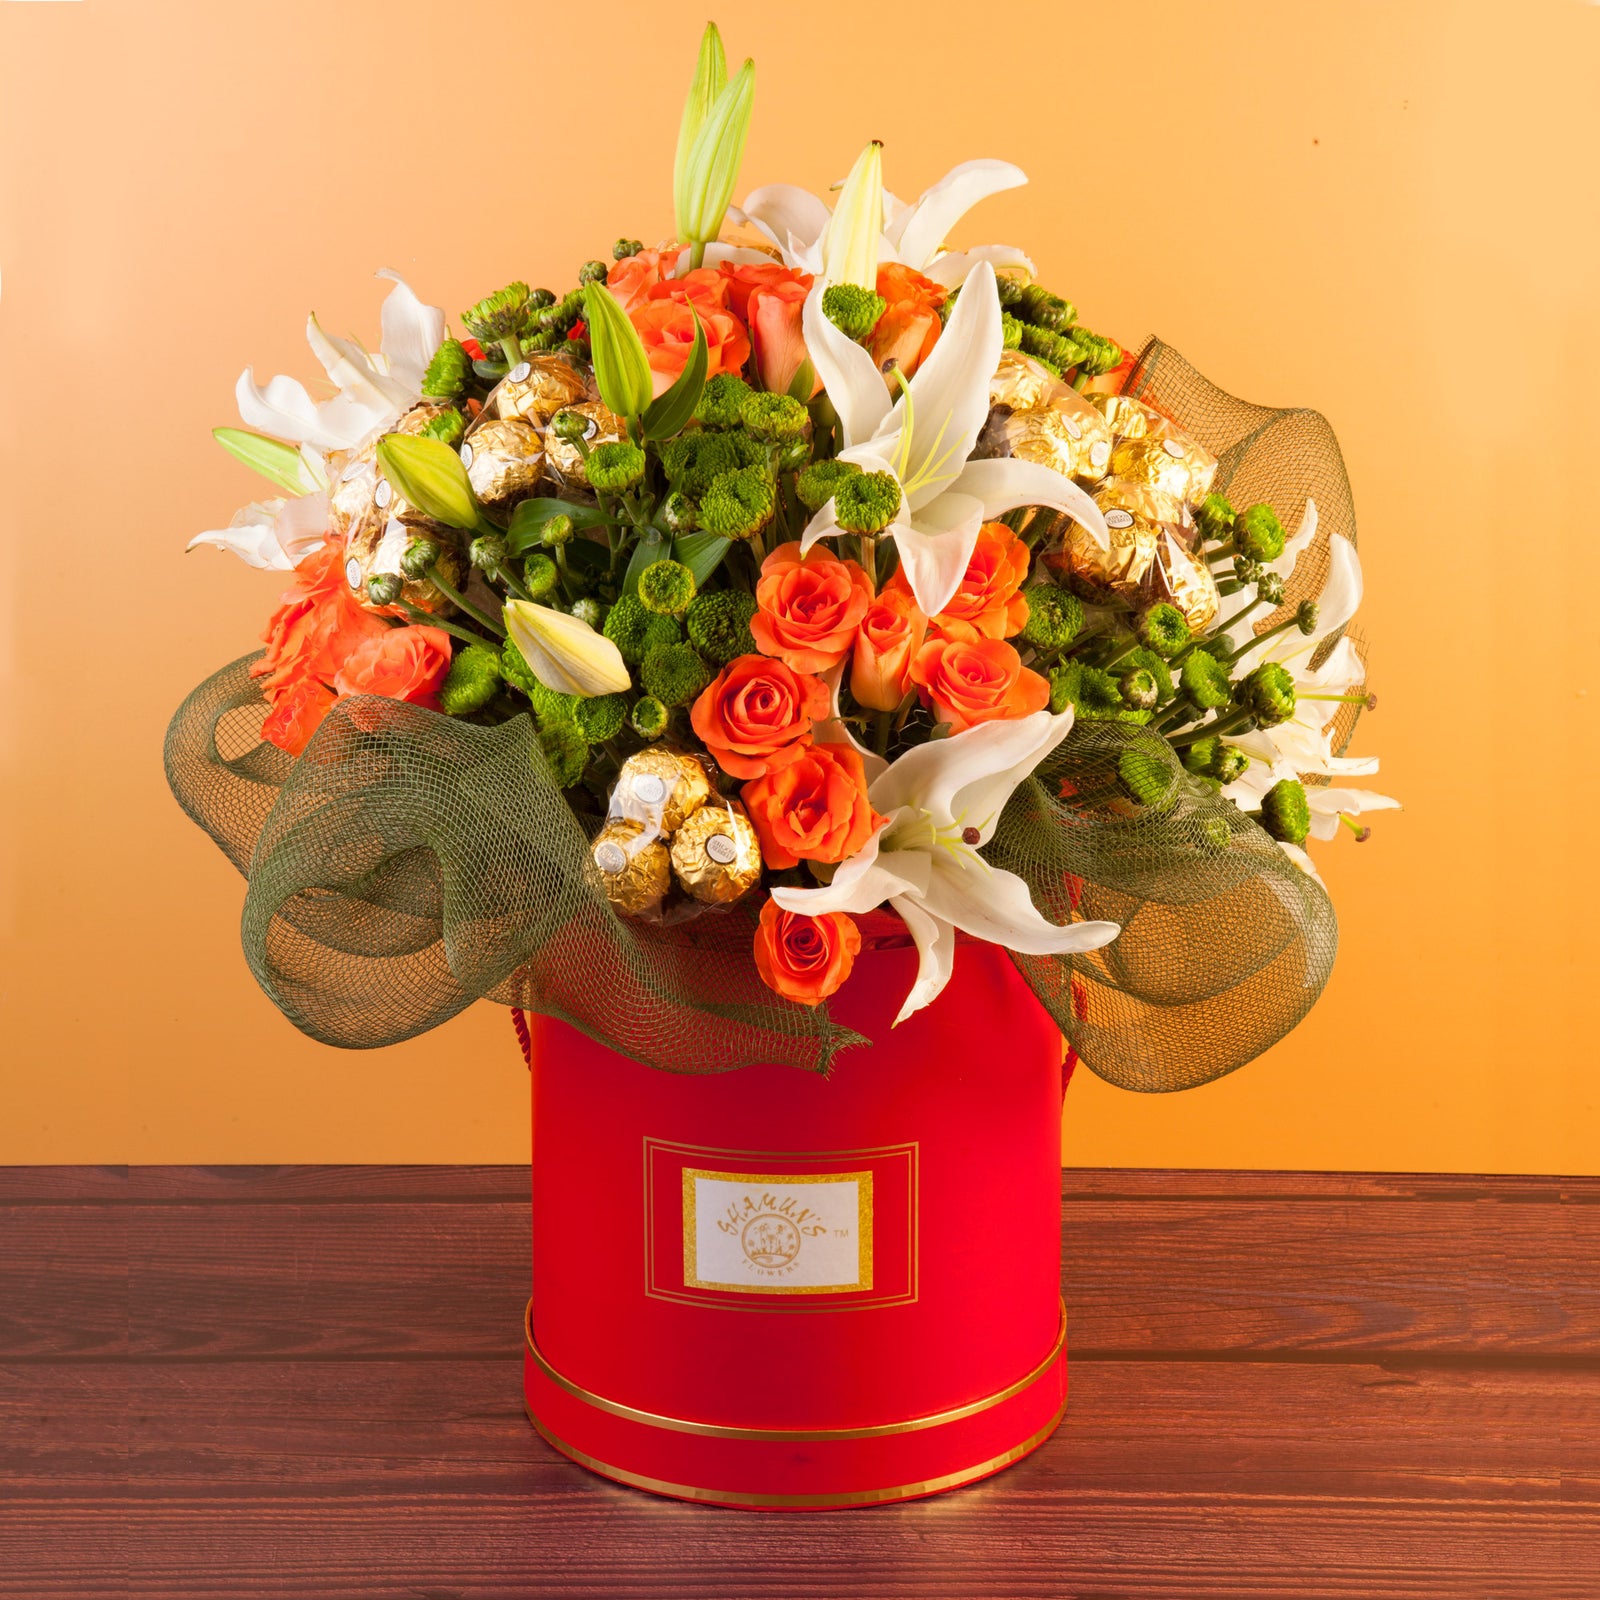 Peach Roses Lilies & Chocolate Delivery In A Hat Box